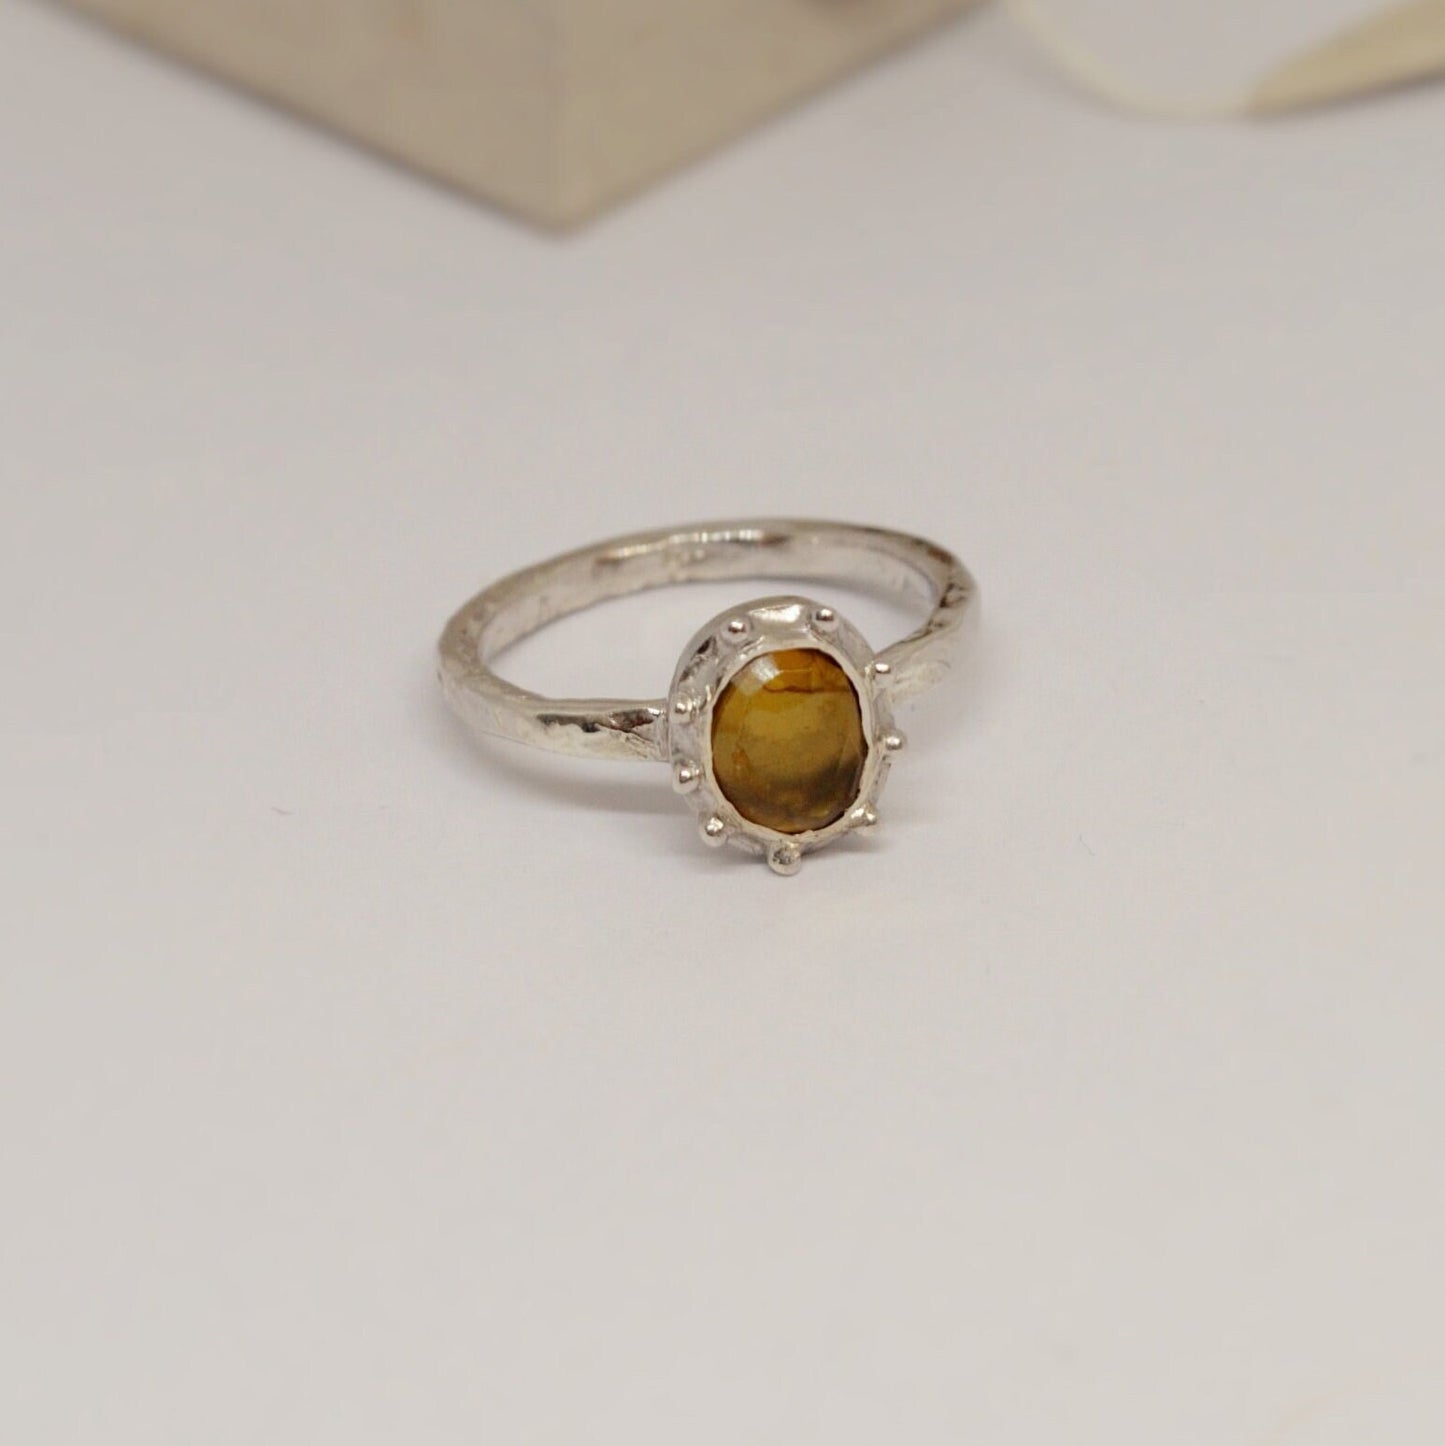 Yellow Tourmaline Ring, Stackable Sterling Silver Rings, October Birthstone, Gifts for her, Birthday Gift, Gemstone Rings for Women